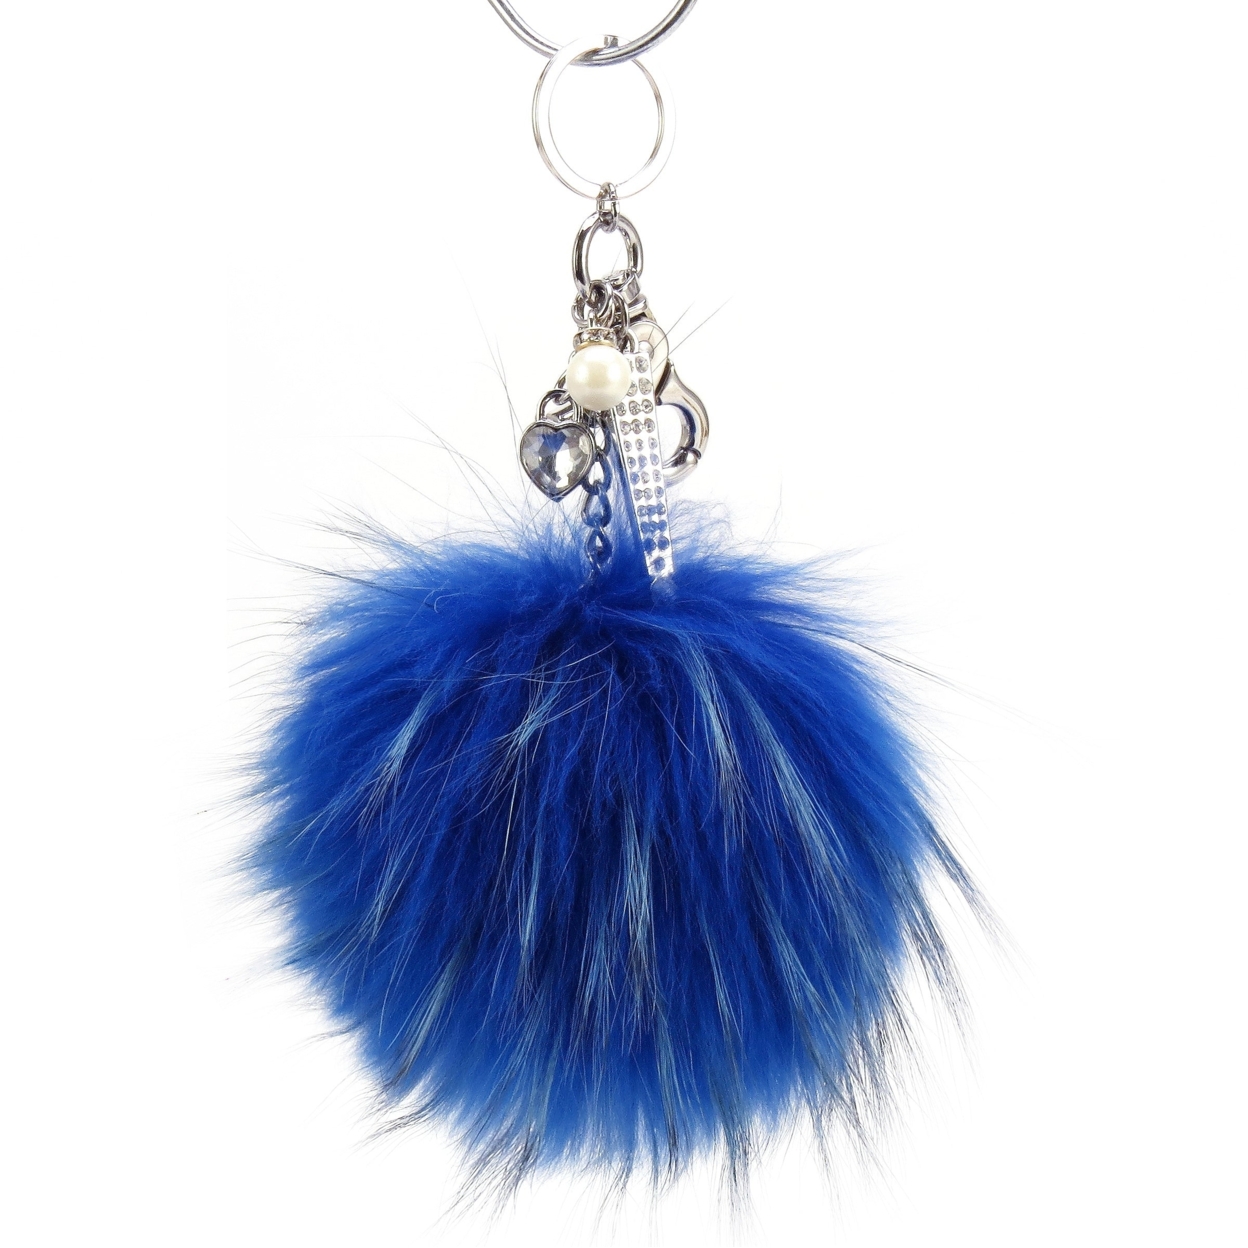 Real Fur Puff Ball Pom-Pom 6 Accessory Dangle Purse Charm - French Blue With Silver Hardware